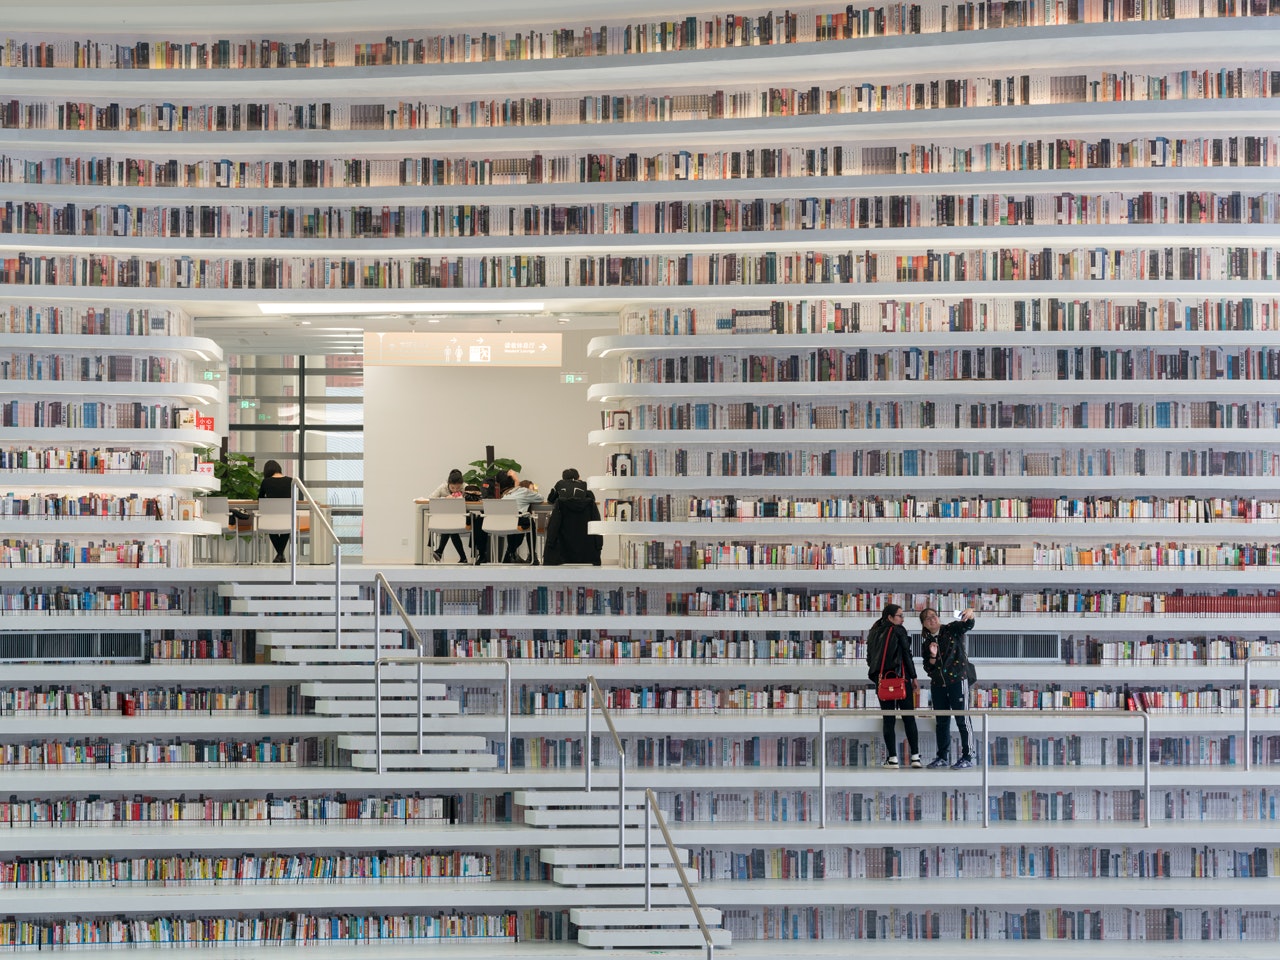 Books line the shelves of the incredible library.